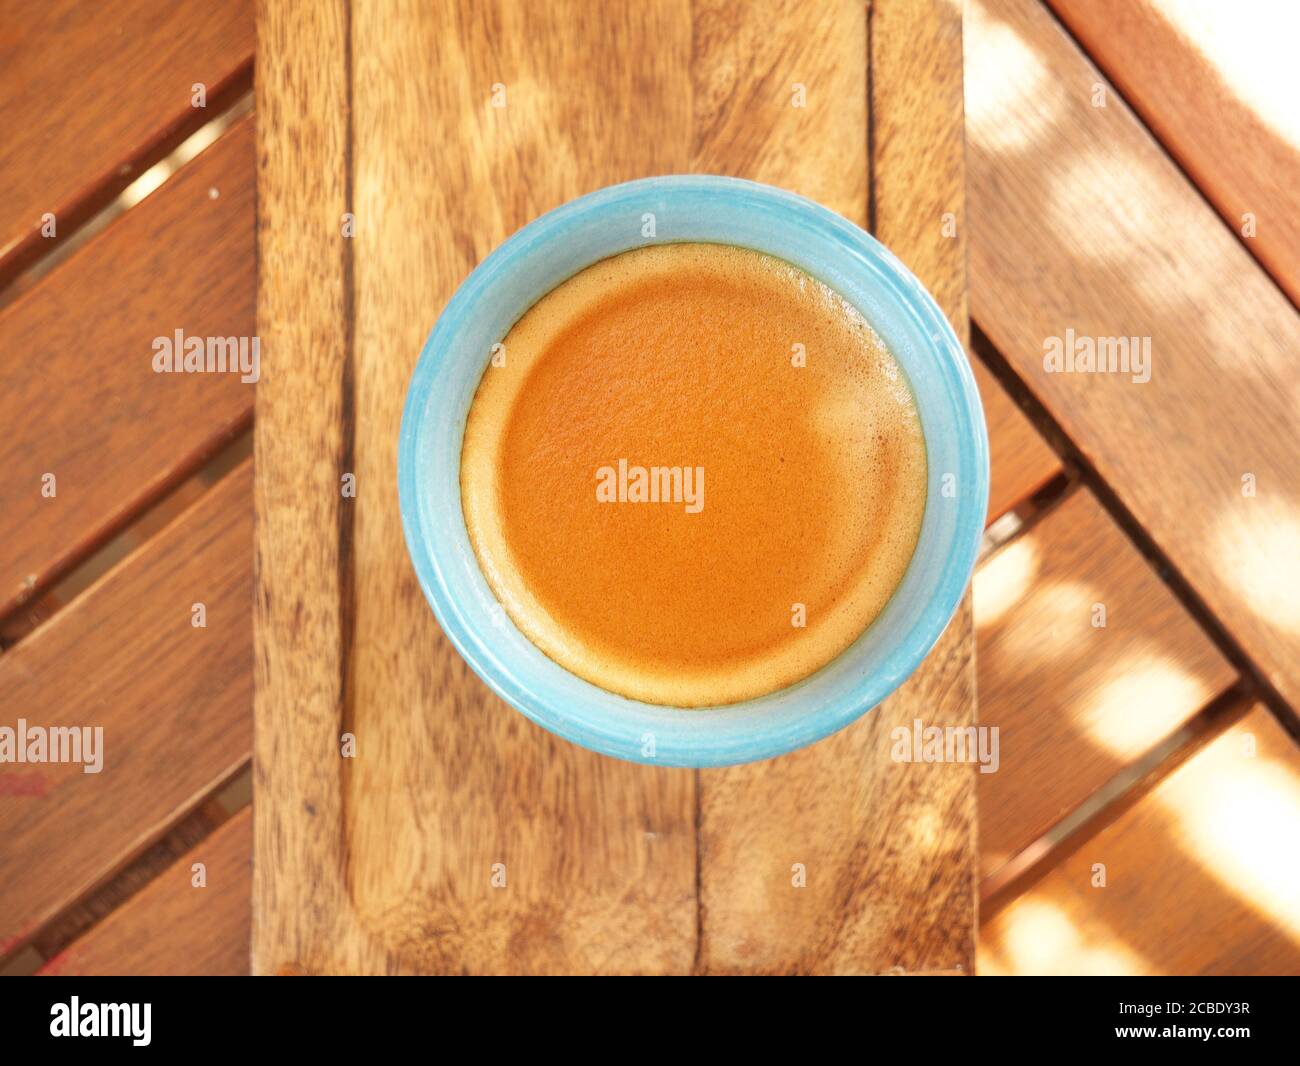 Close-up of a coffee cup seen from above on a wooden table Stock Photo